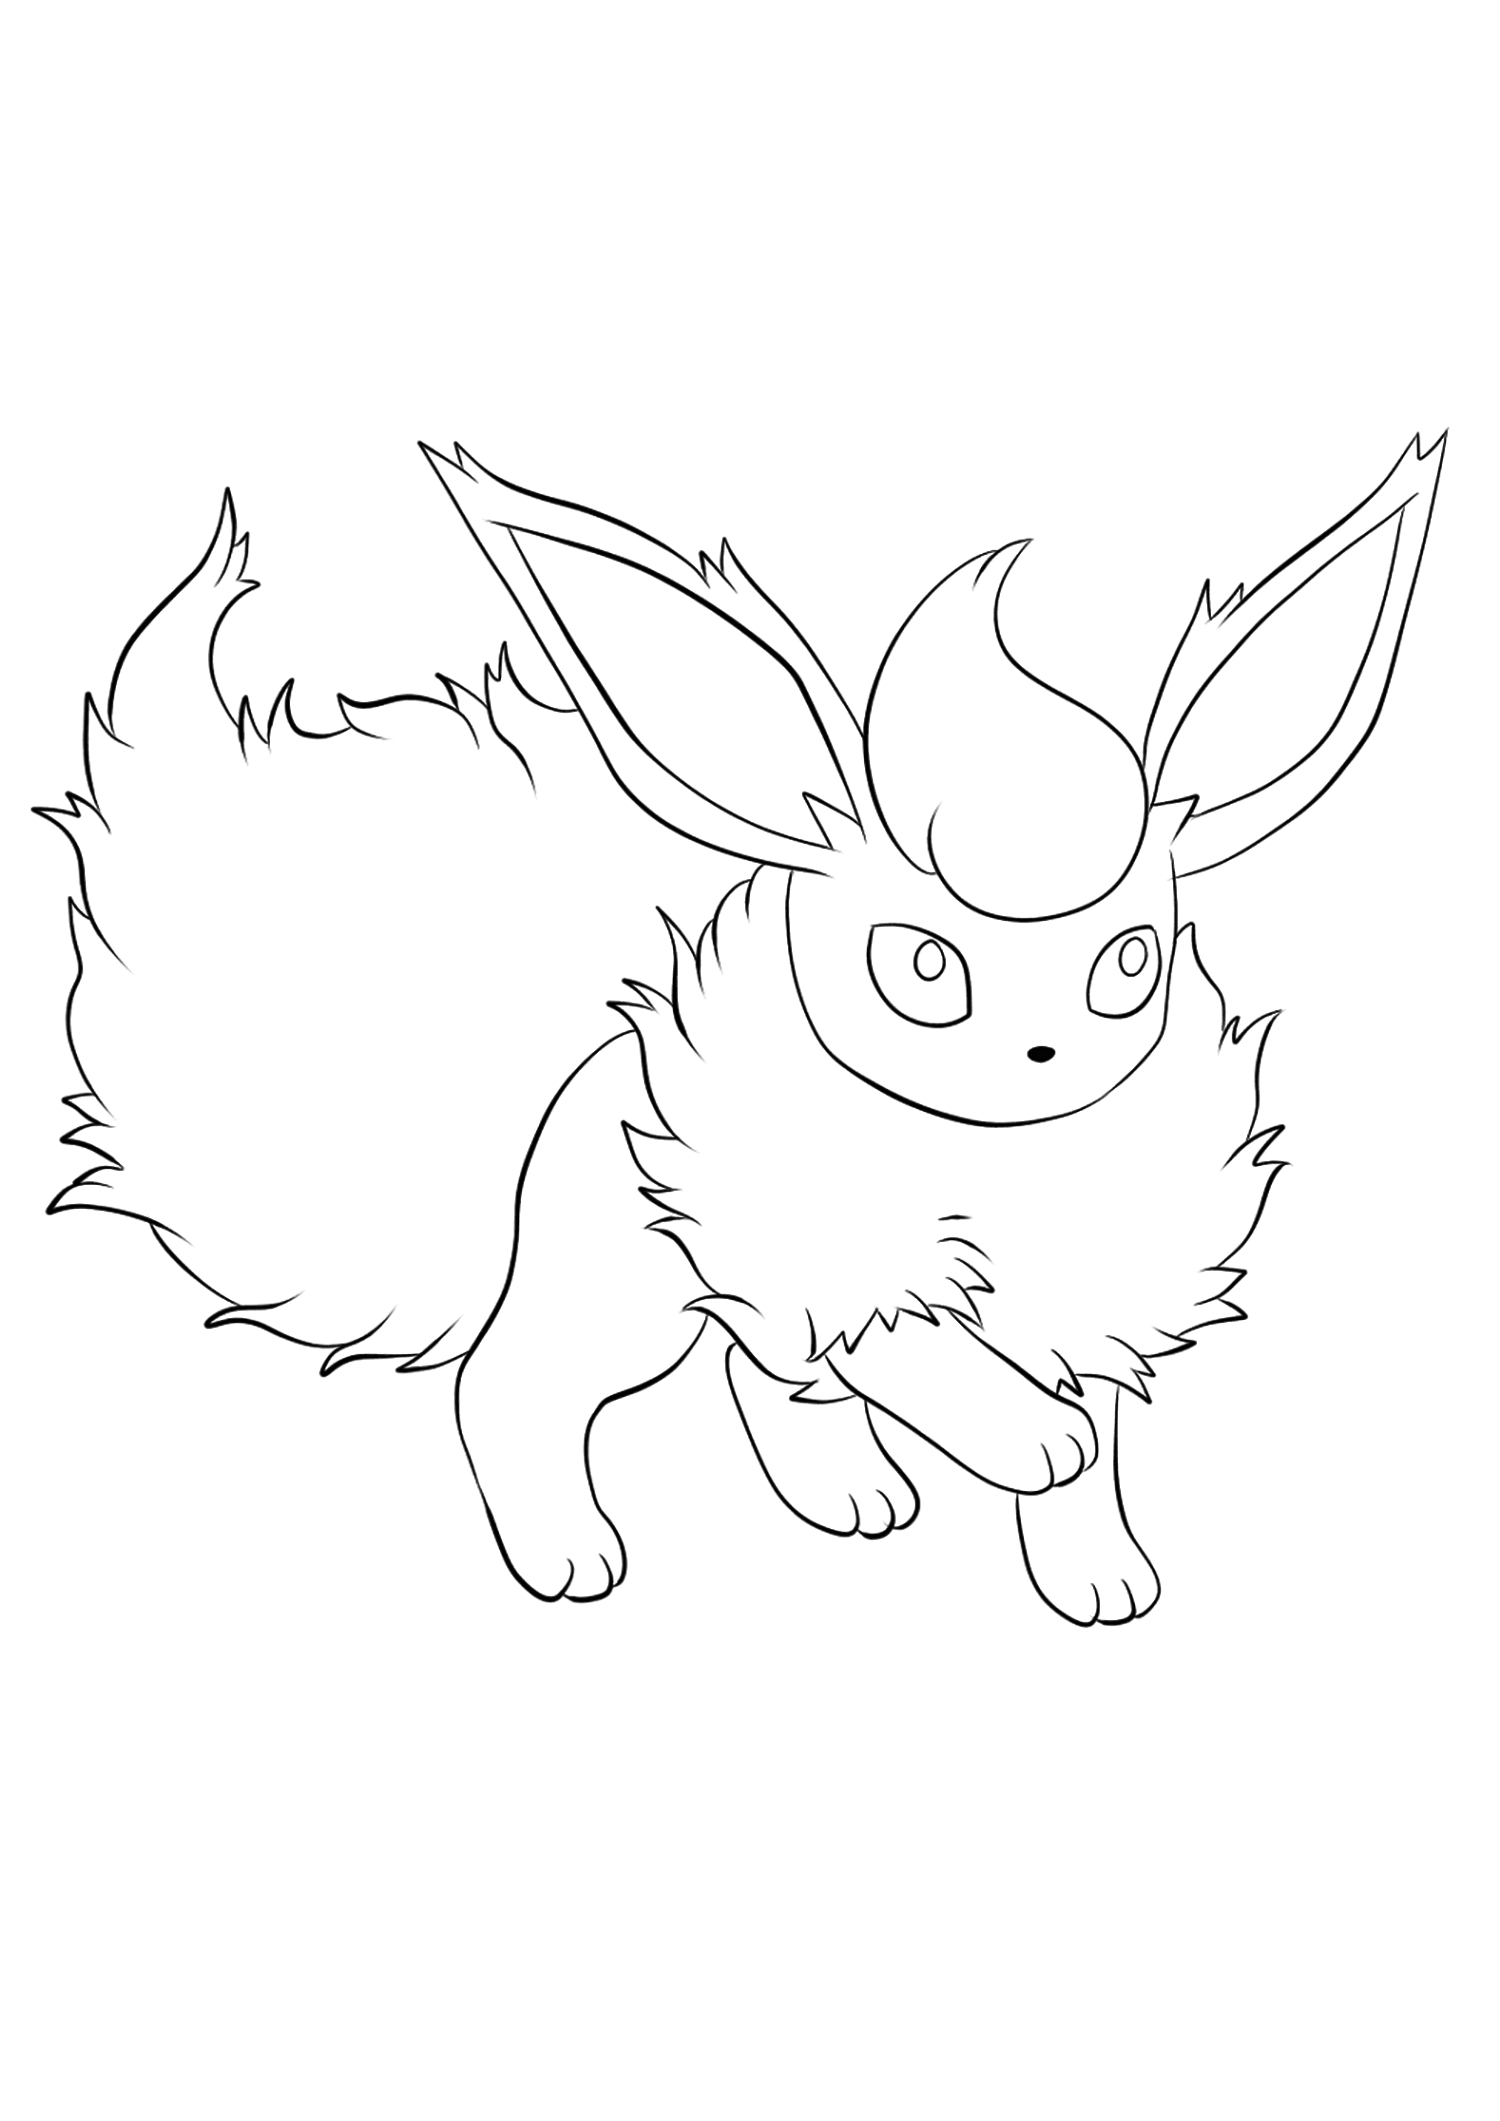 Flareon (No.136). Flareon Coloring page, Generation I Pokemon of type FireOriginal image credit: Pokemon linearts by Lilly Gerbil on Deviantart.Permission:  All rights reserved © Pokemon company and Ken Sugimori.